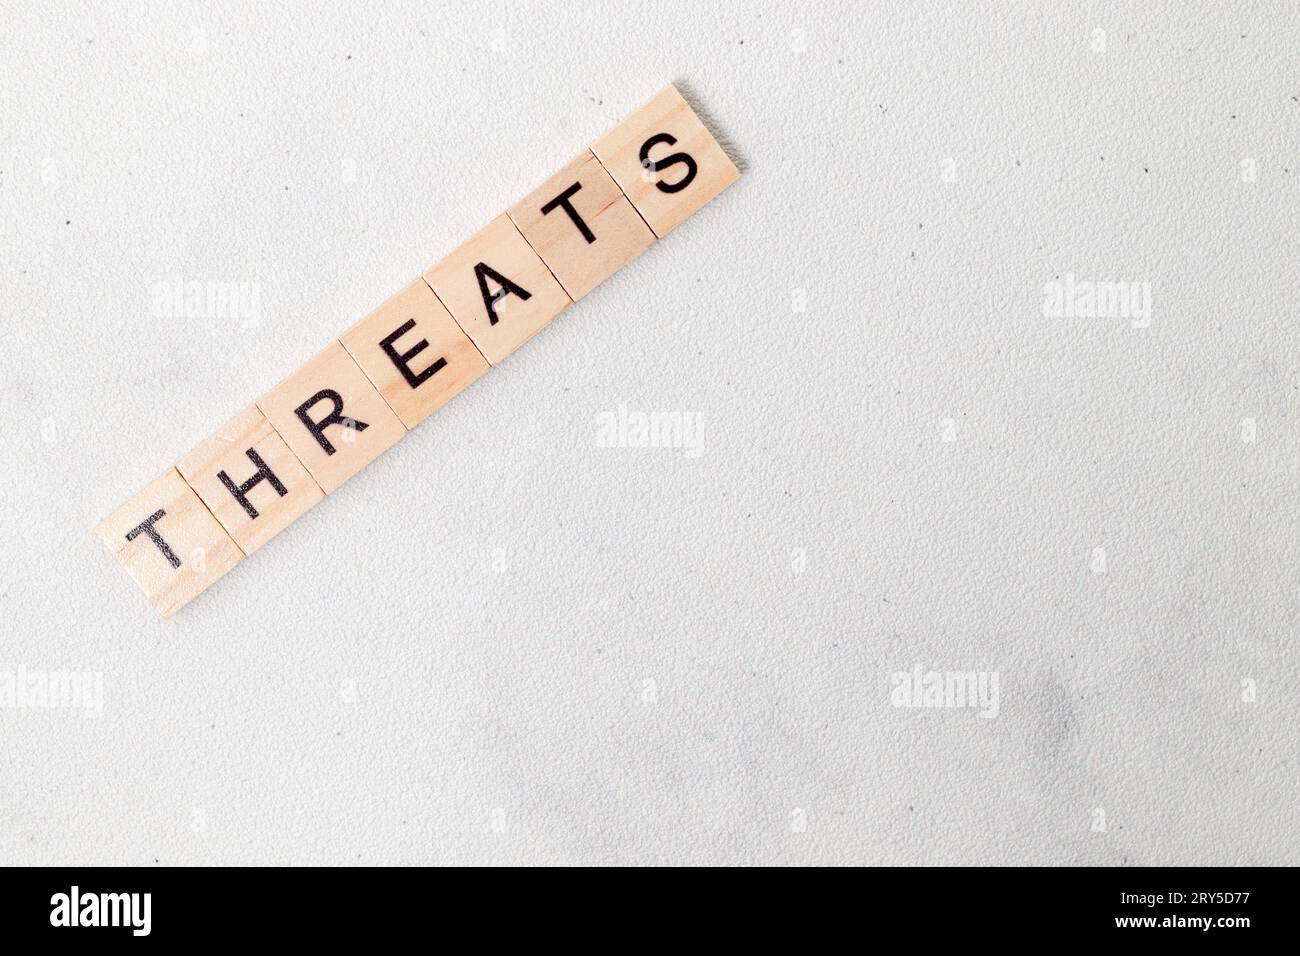 Top view of Threats word on wooden cube letter block on white background. Business concept Stock Photo